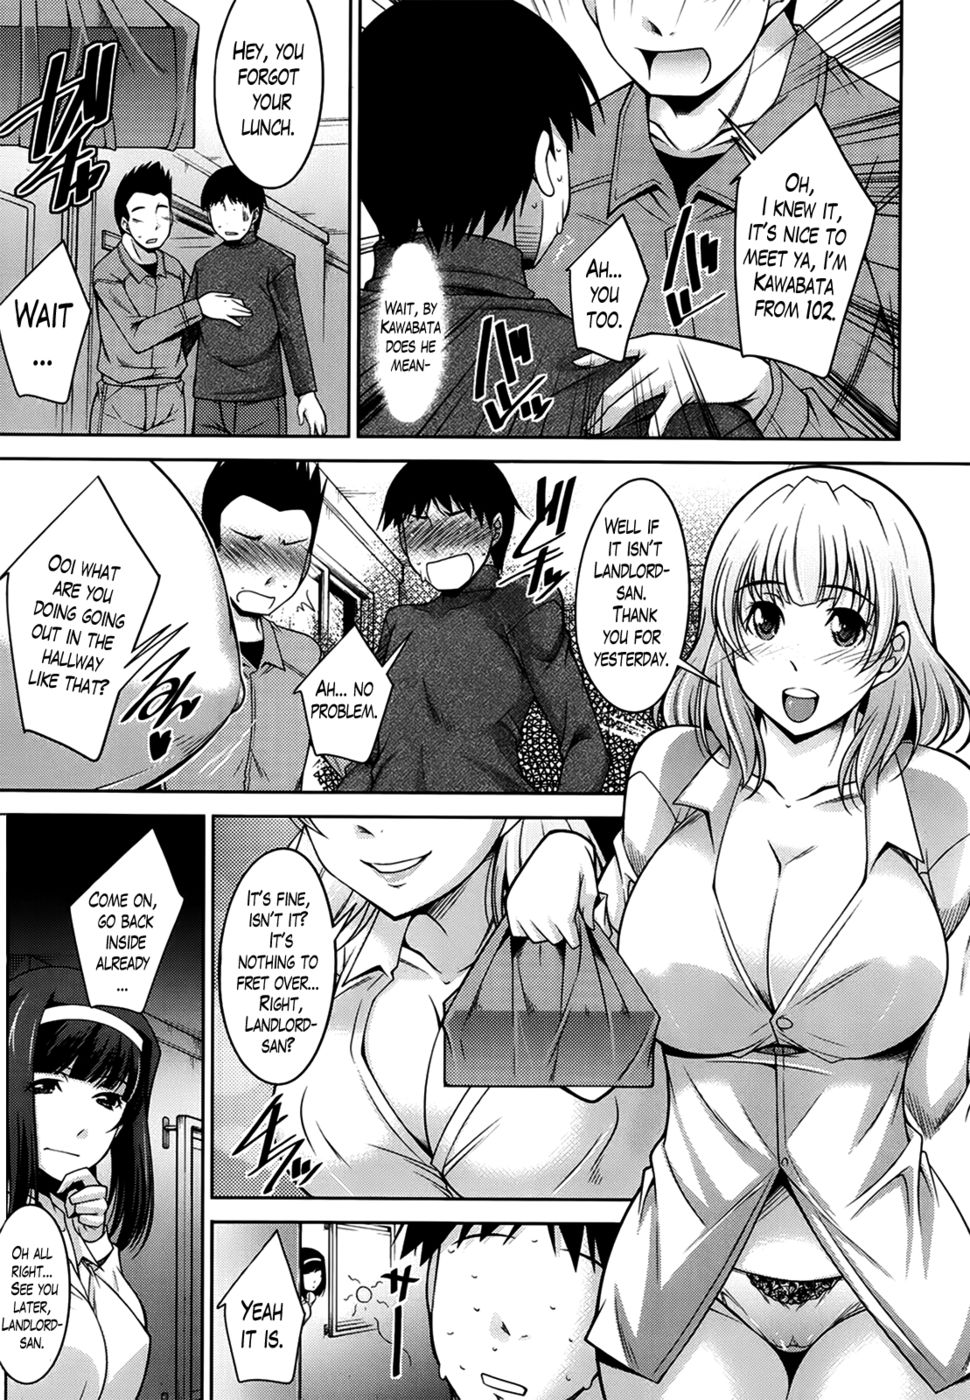 Hentai Manga Comic-A Way to Spend a Boring Afternoon-Chapter 3-3